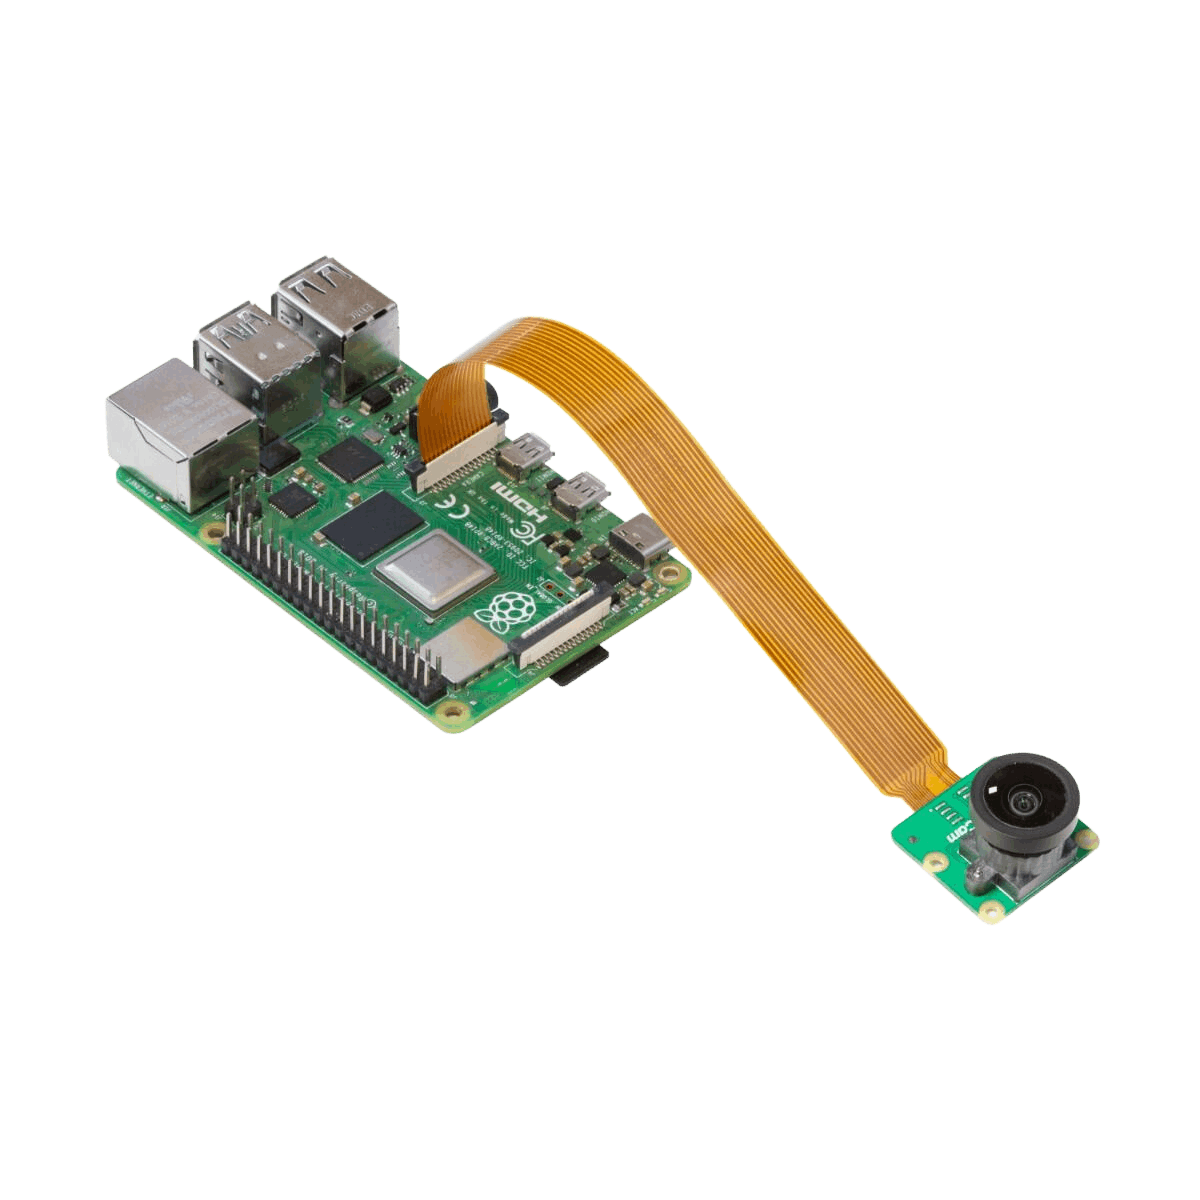 B0310 camera module connected to a raspberry pi 4